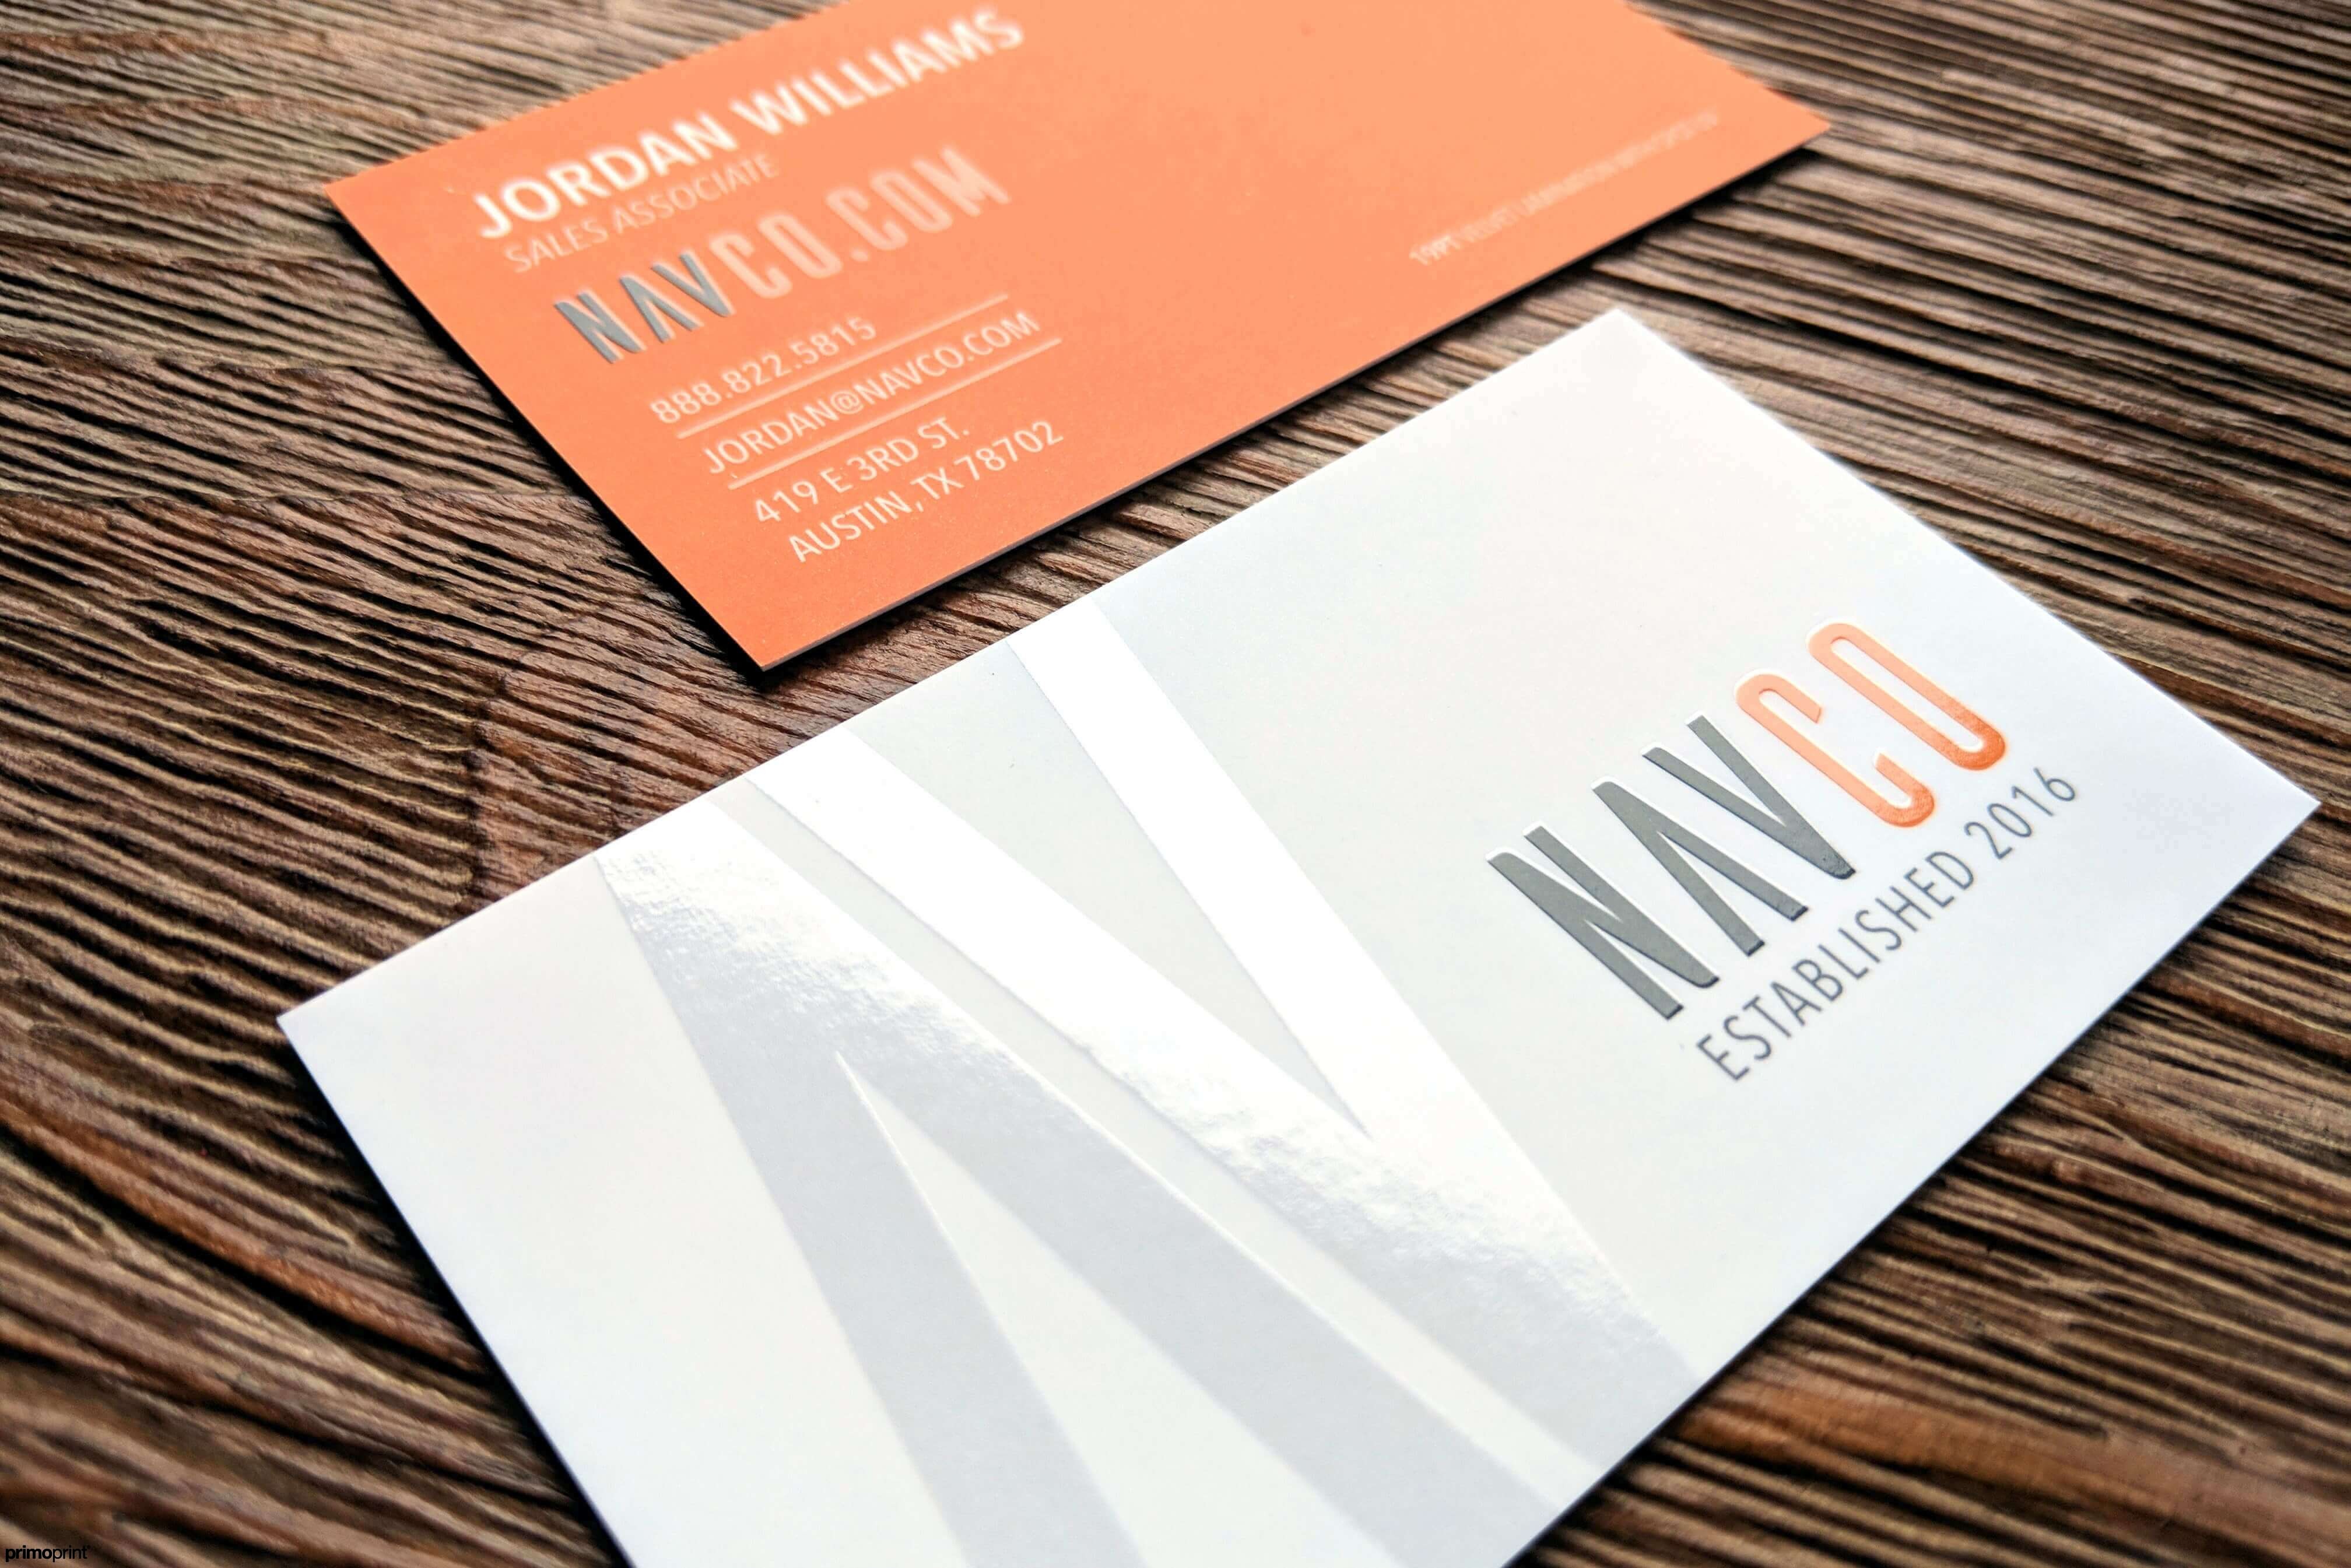 Raised Spot UV Business Cards Printed on 16pt Card Stock with Soft 1.5 mil  Velvet Lamination by Elite Flyers